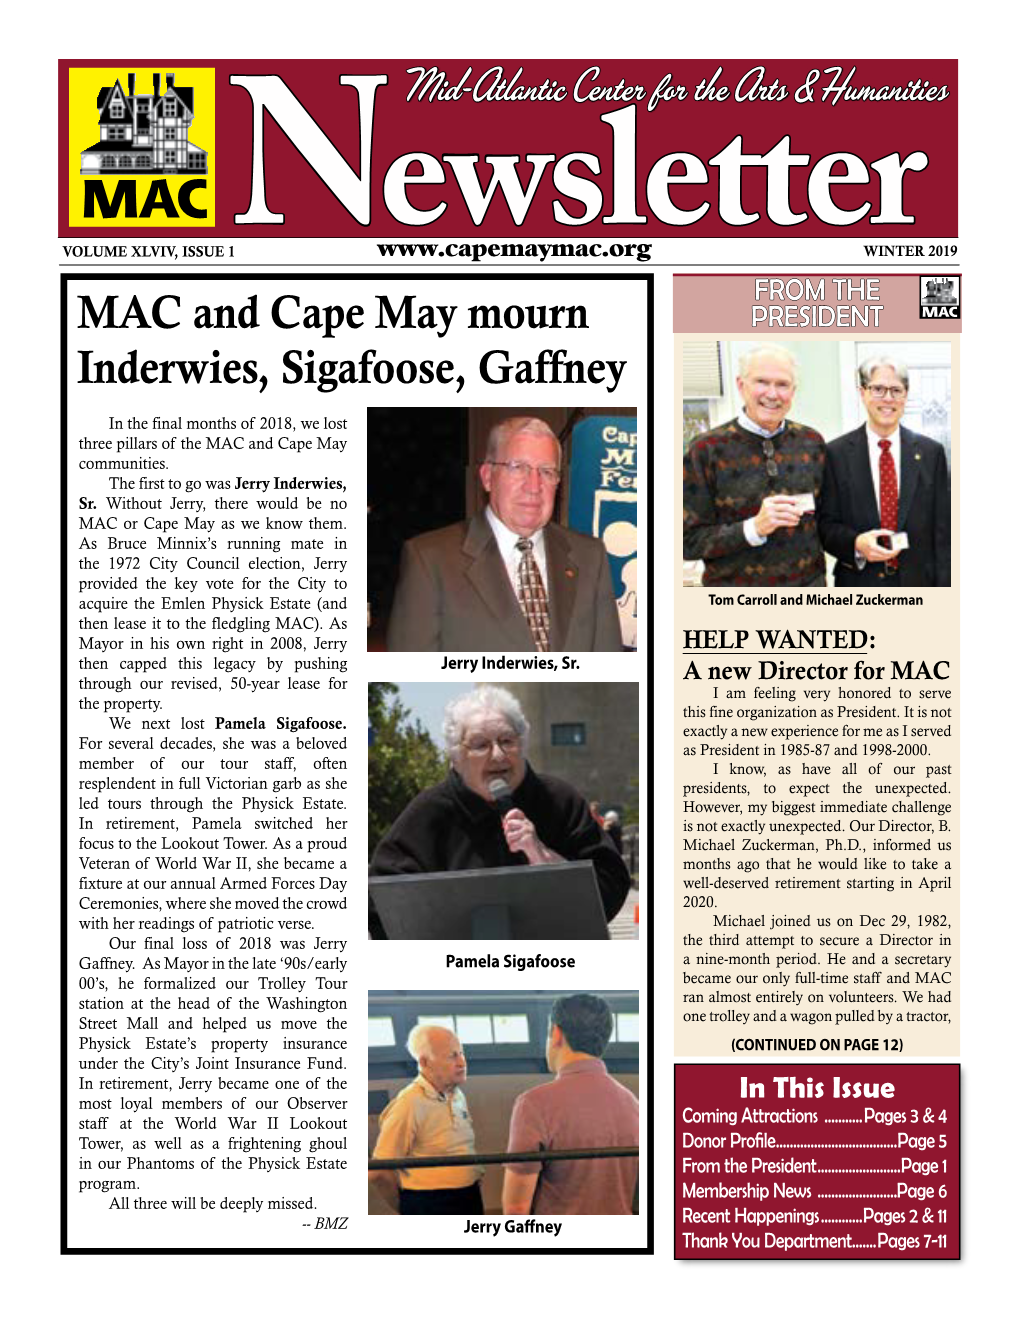 WINTER 2019 from the MAC Andn Cape Mayewsletter Mourn PRESIDENT MAC Inderwies, Sigafoose, Gaffney